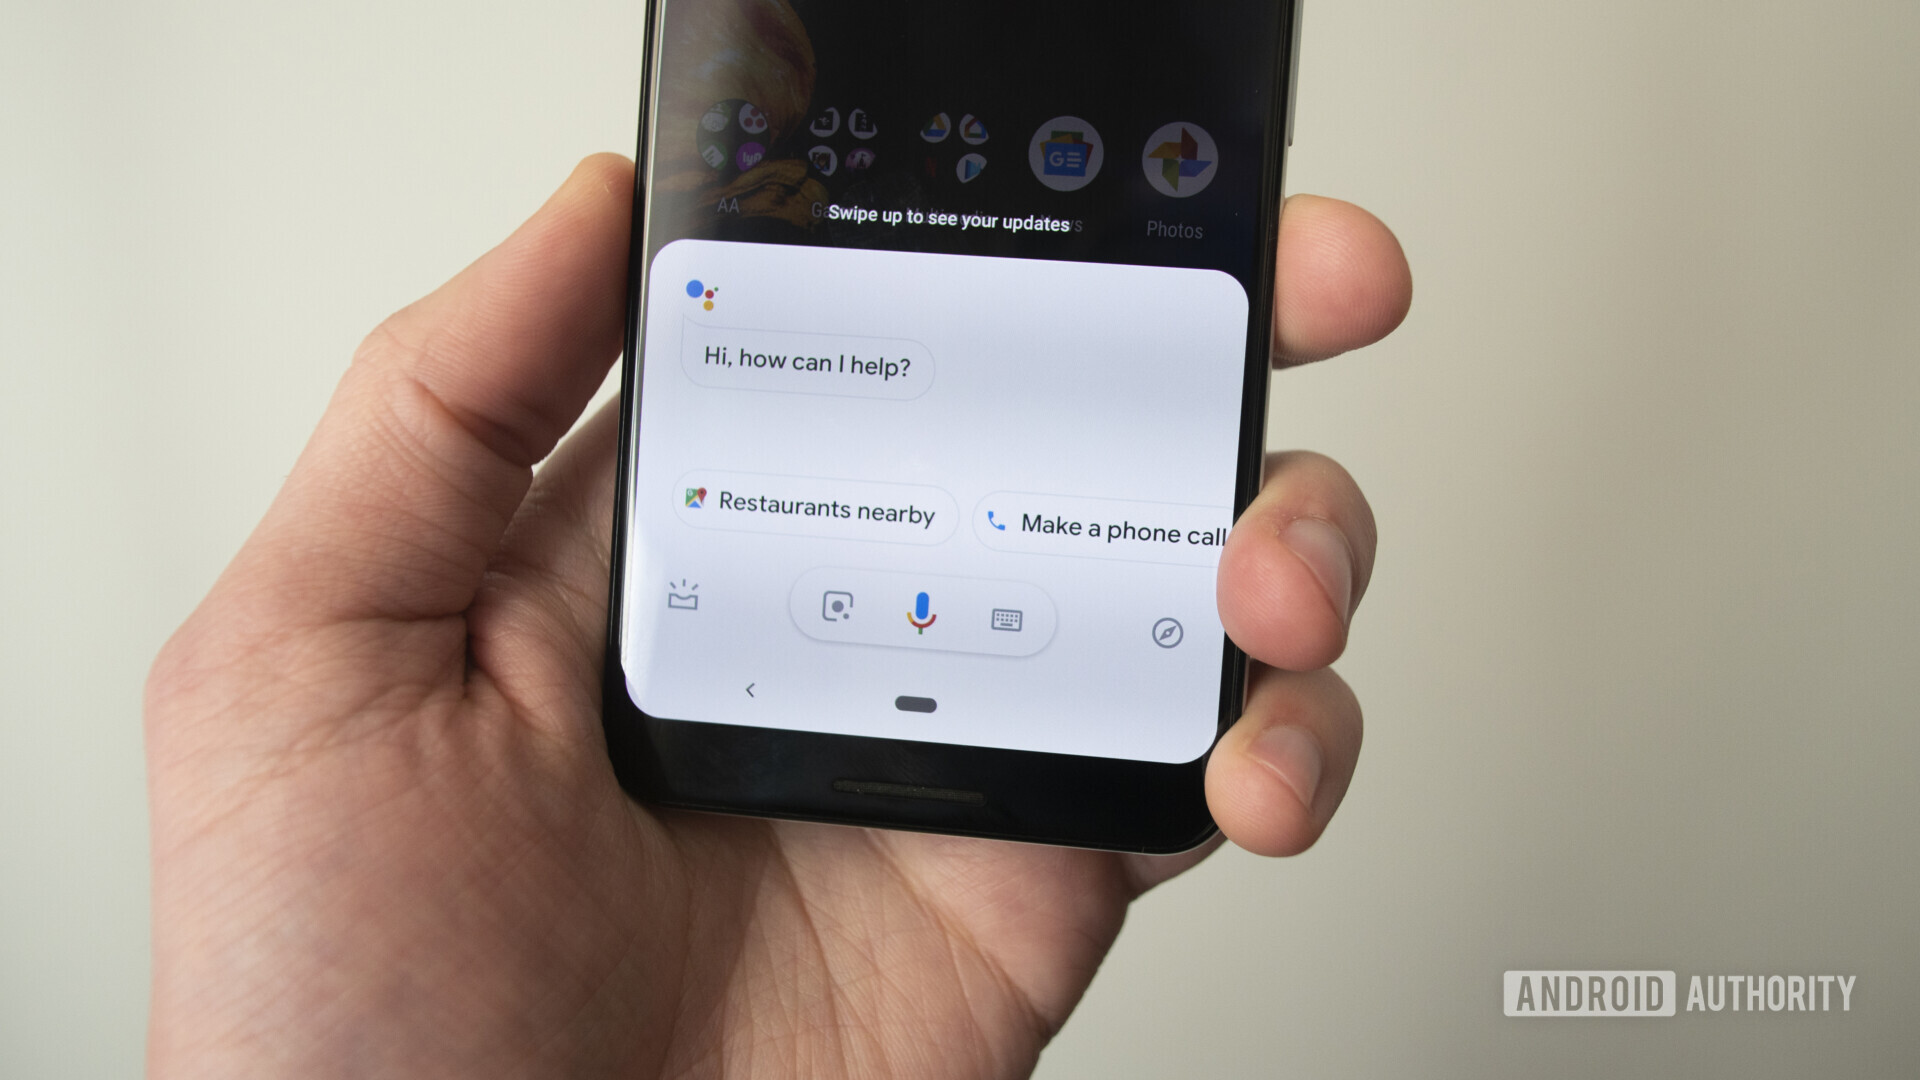 Google Assistant is getting more privacy features and tweaks.